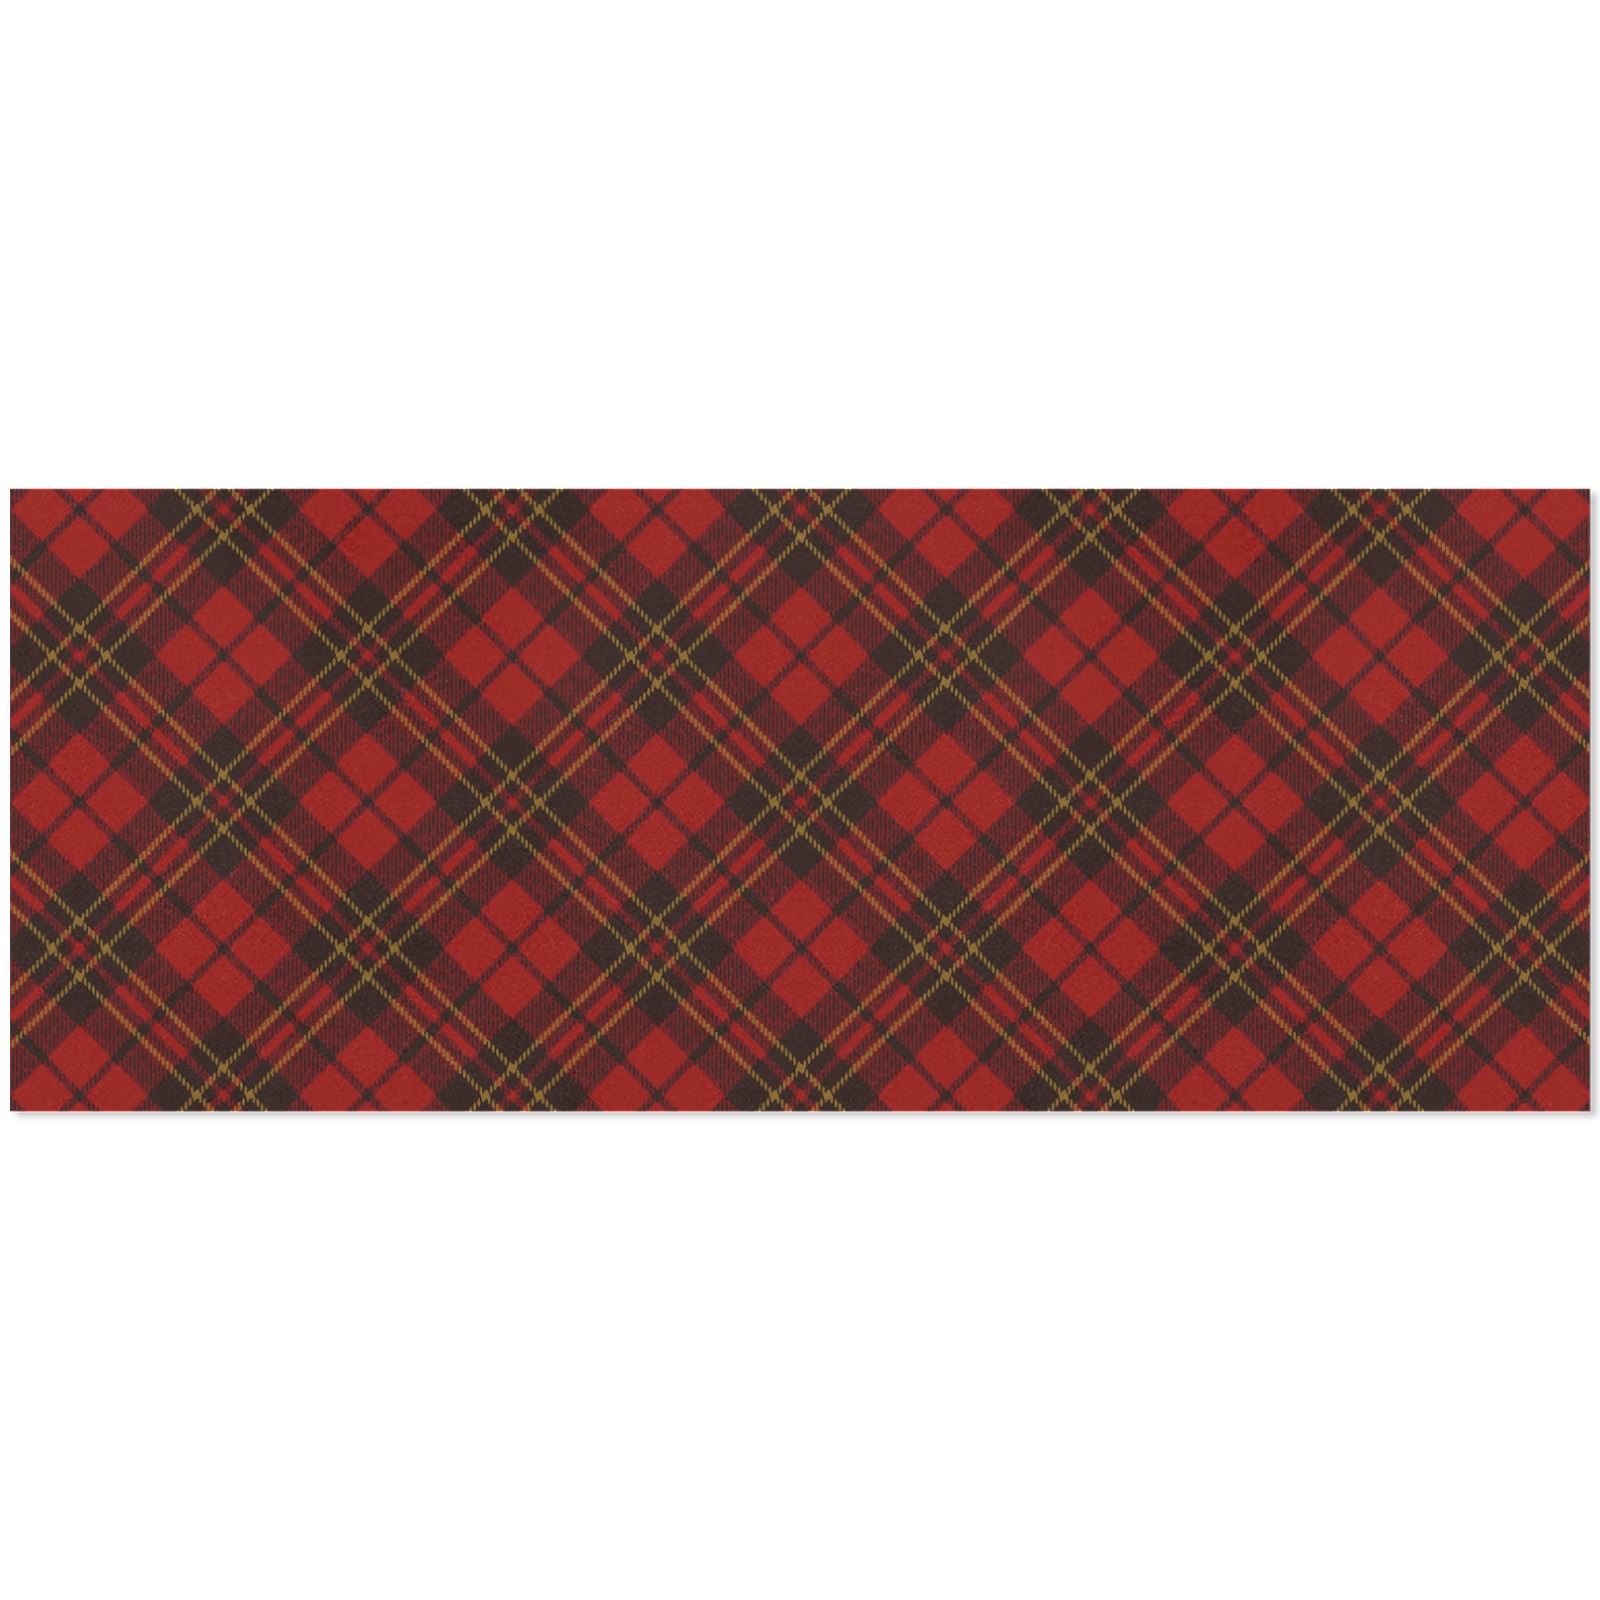 Red tartan plaid winter Christmas pattern holidays Gift Wrapping Paper 58"x 23" (2 Rolls)